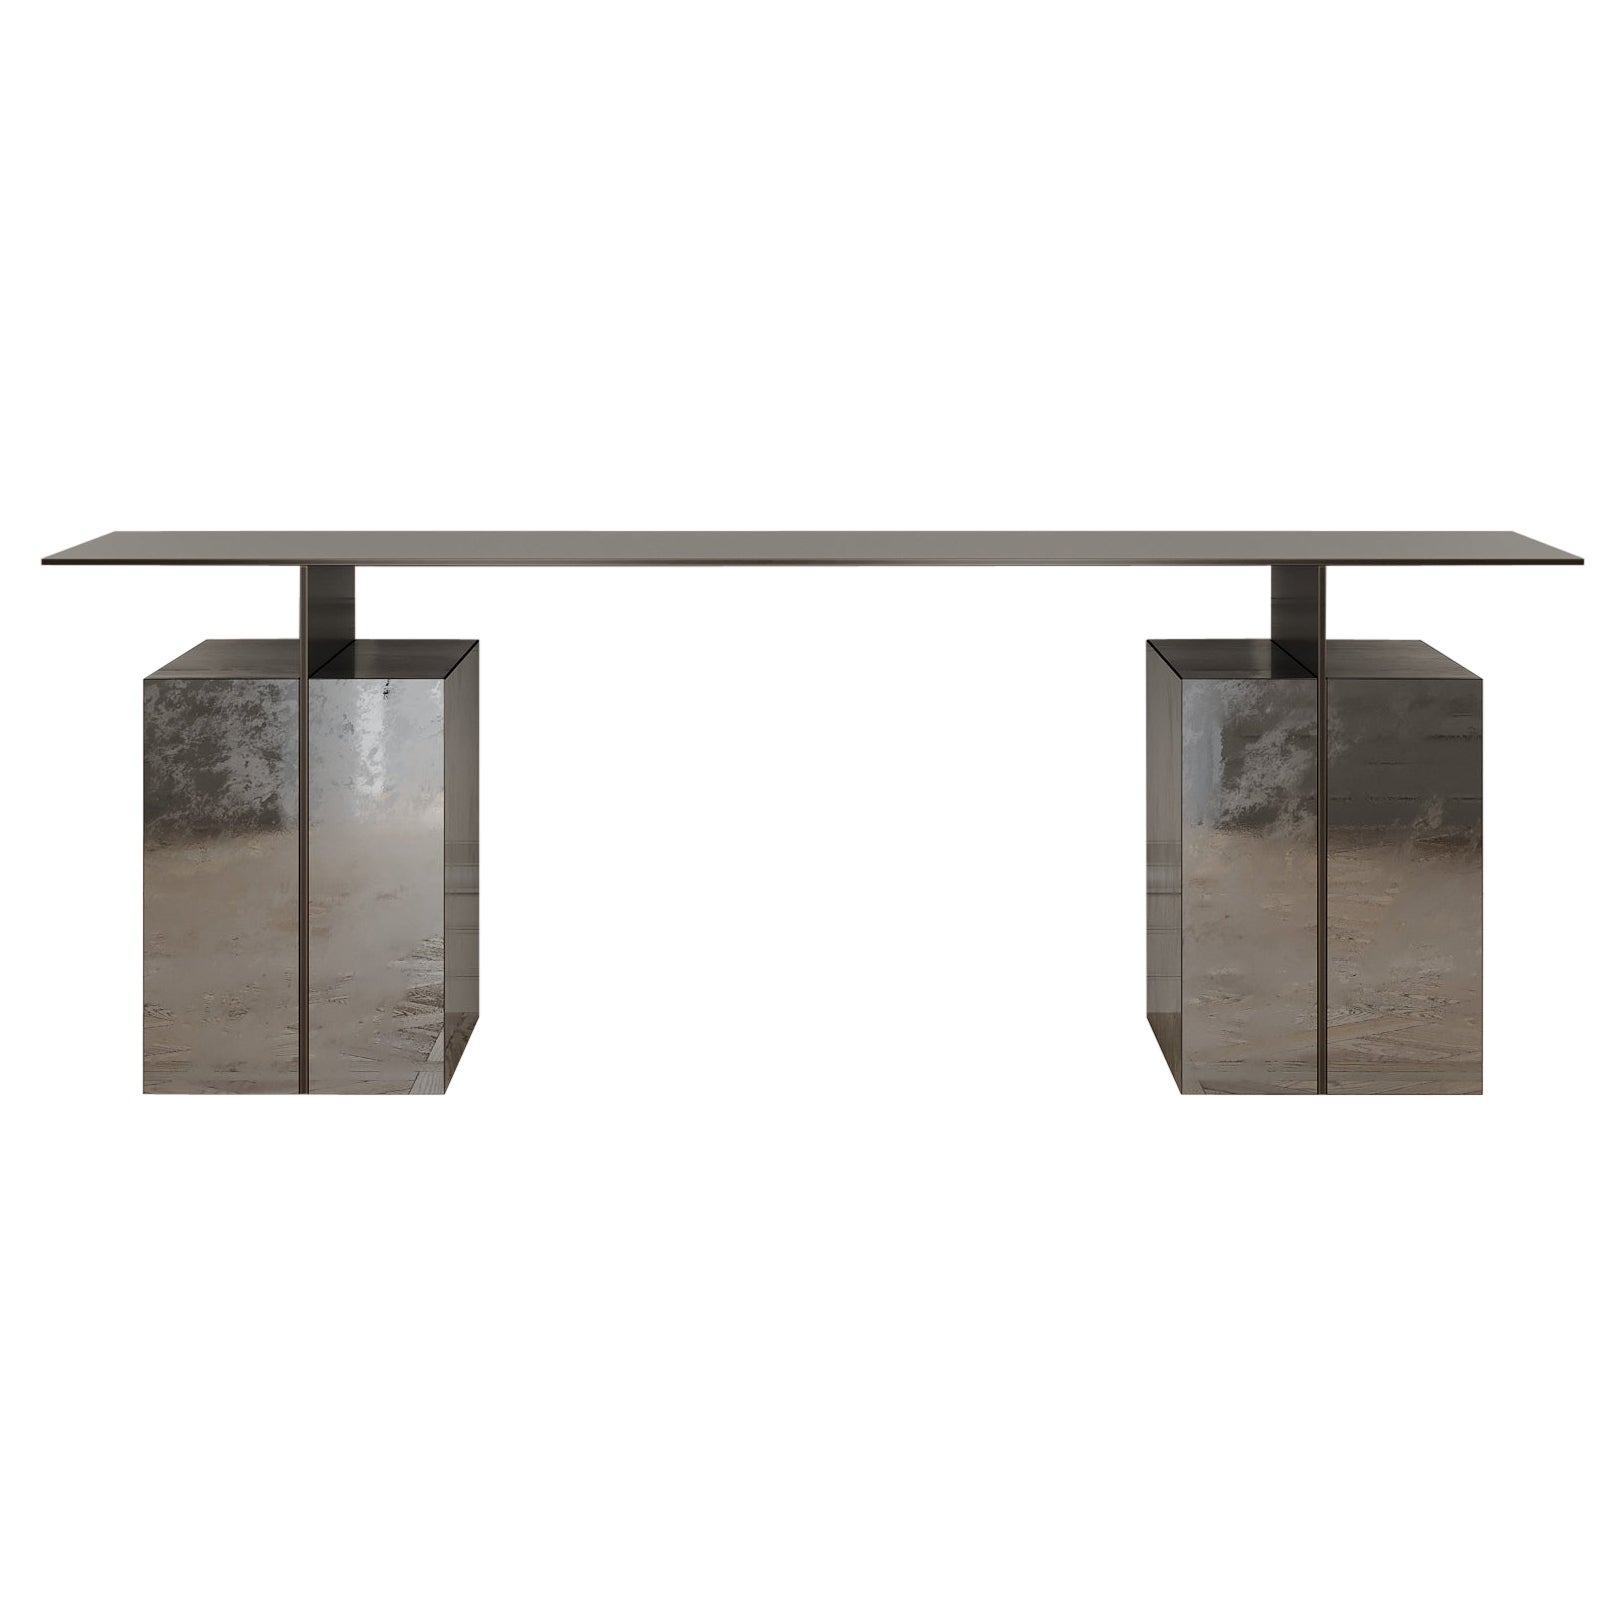 Meridiem Desk of Antiqued Mirror and Patinated Steel, Made in Italy For Sale